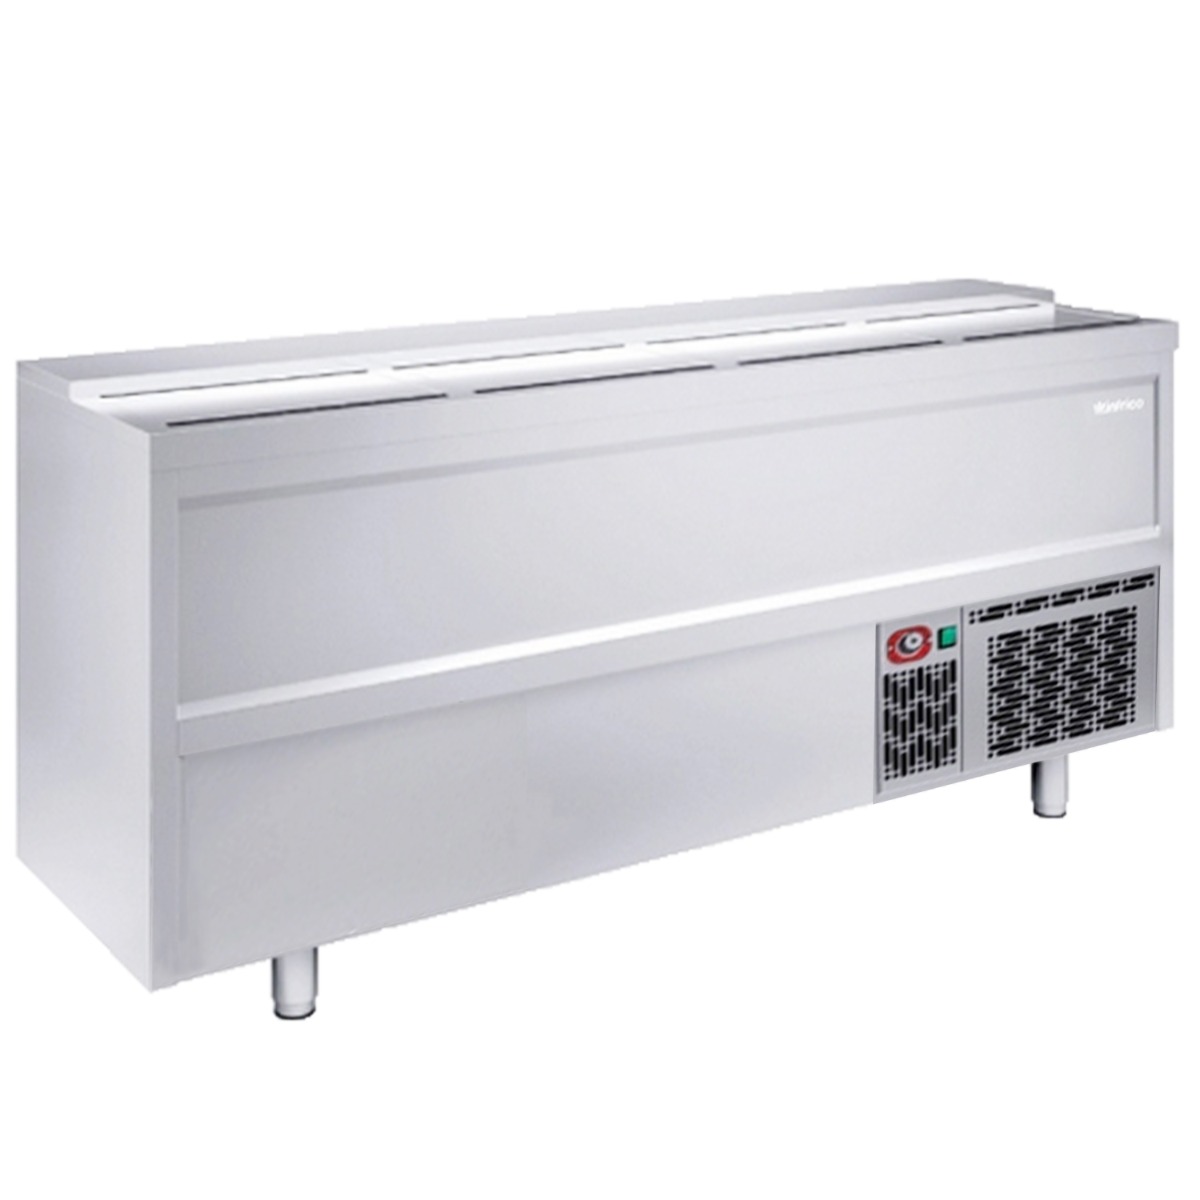 INFRICO Stainless Steel Beer Dump 620L - EB2000